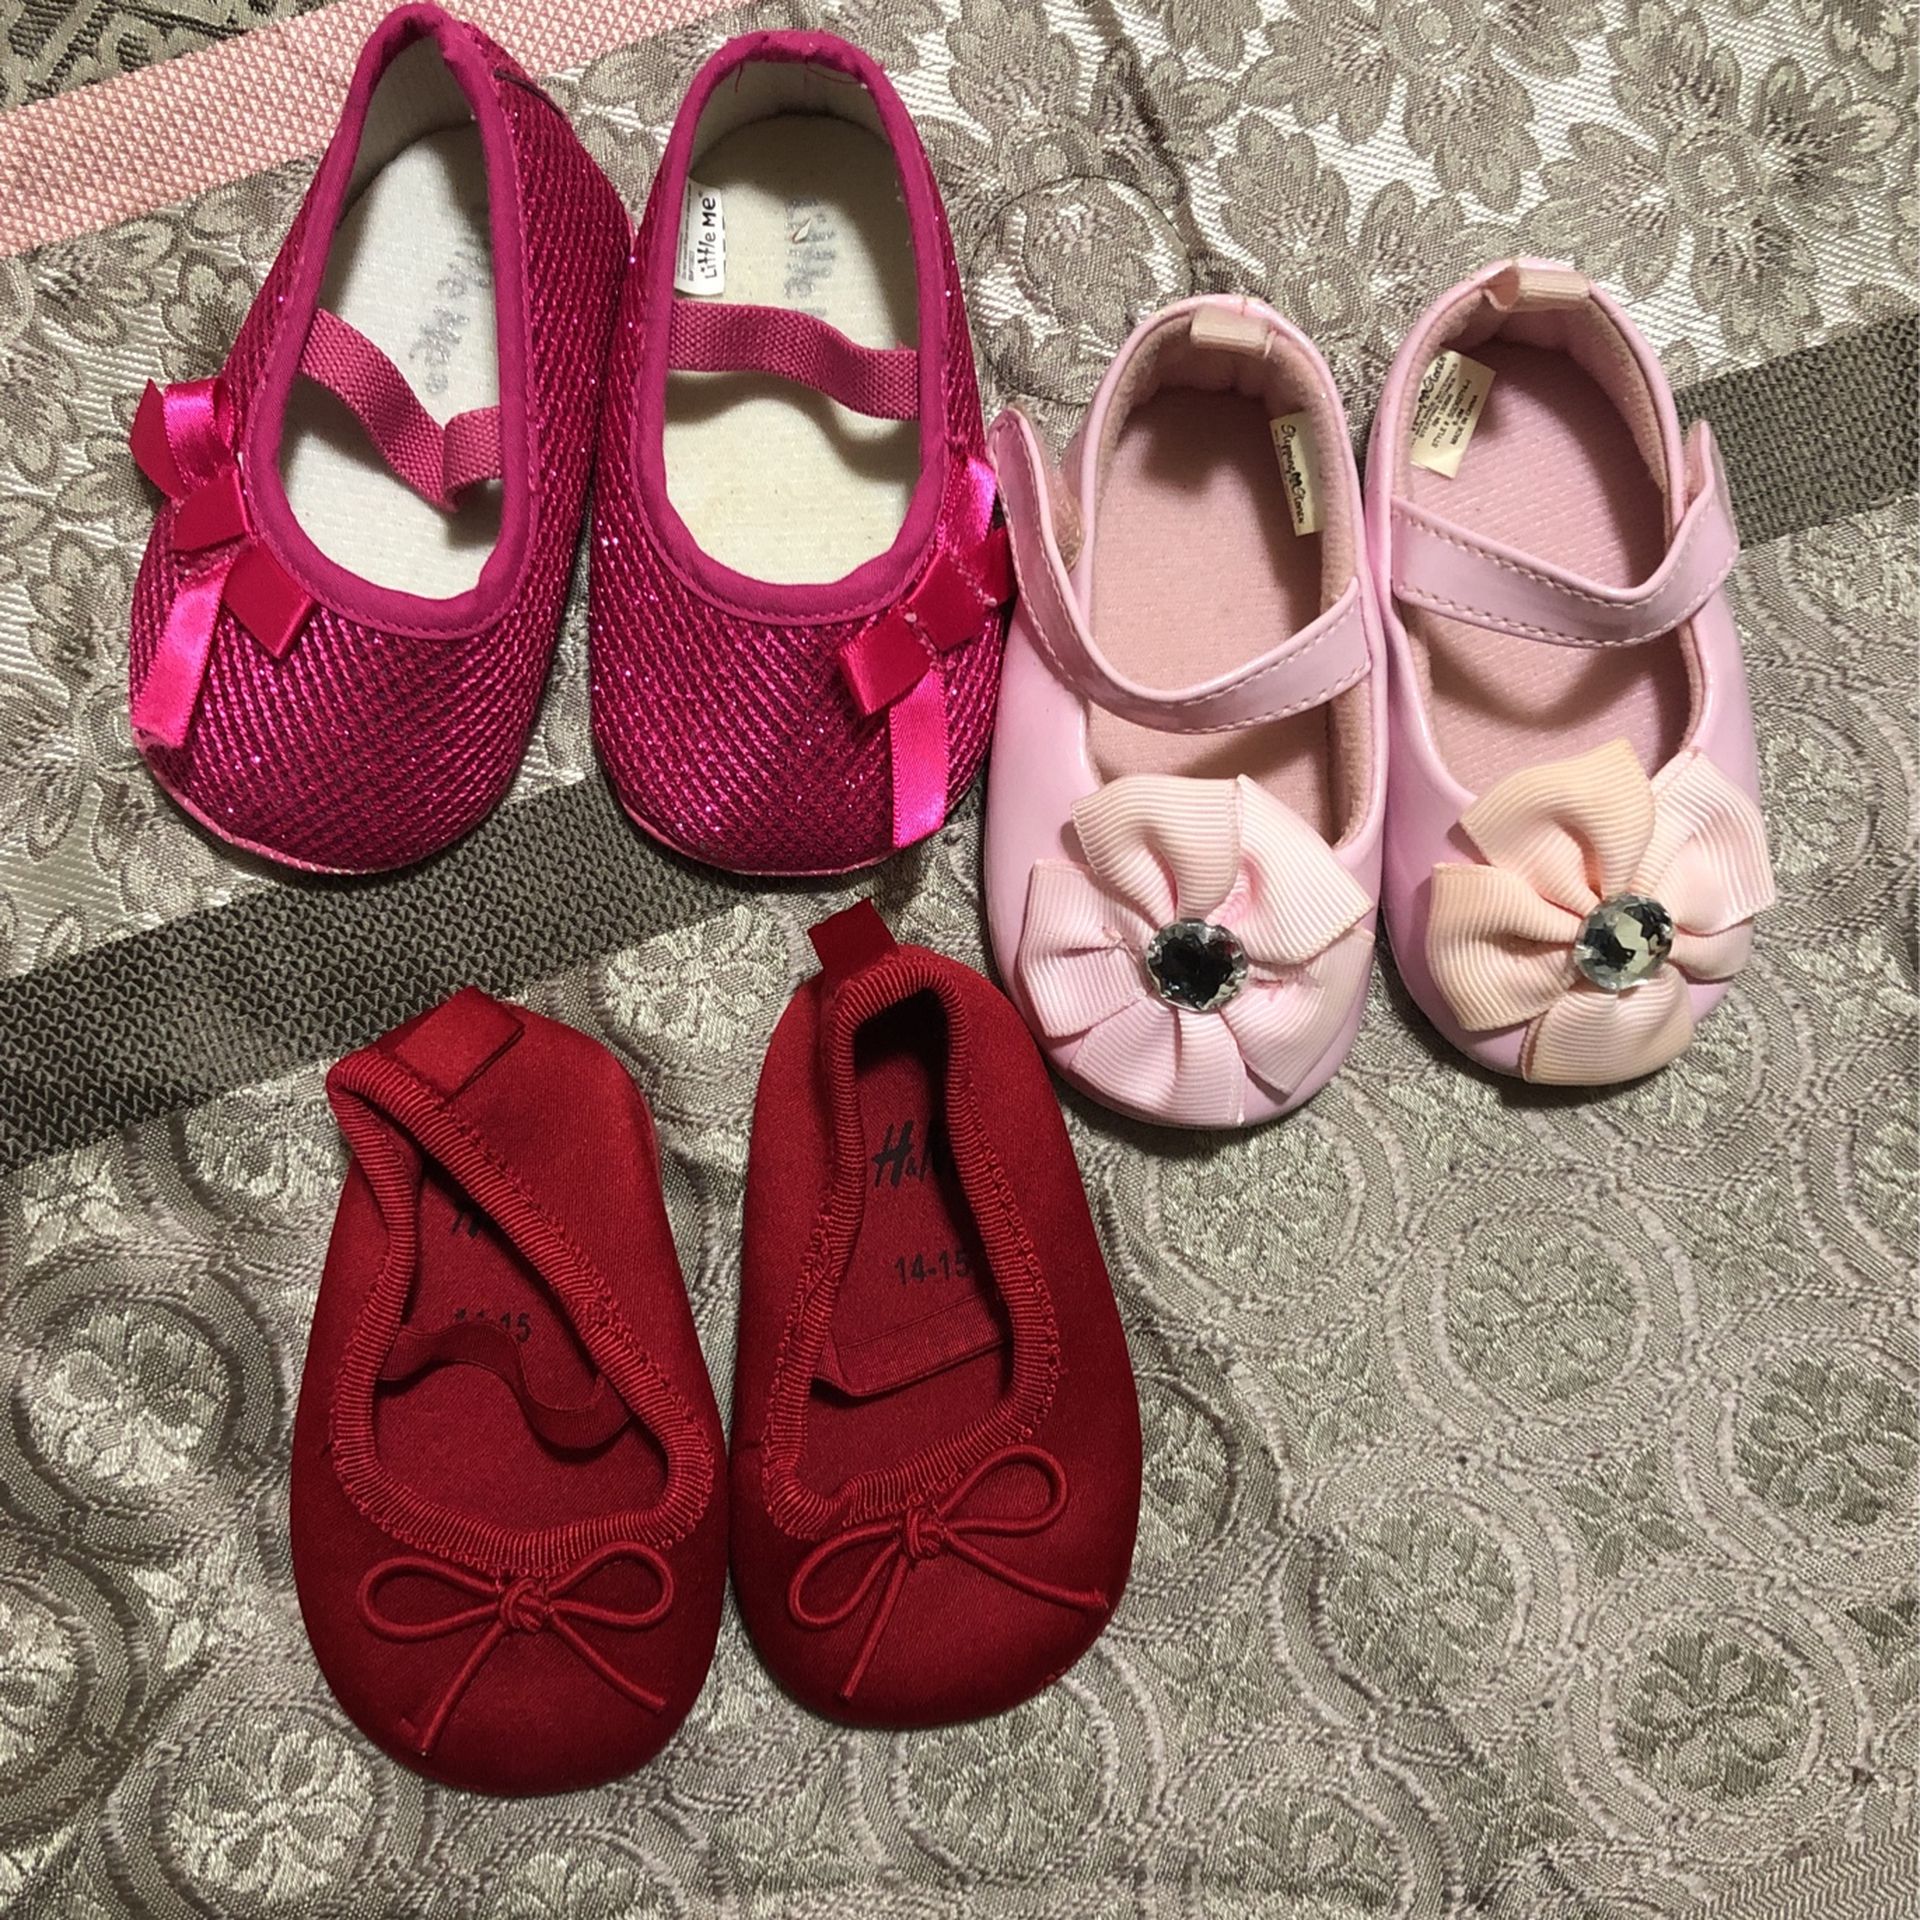 Light pink shoes, Fuchsia and red Dress shoes